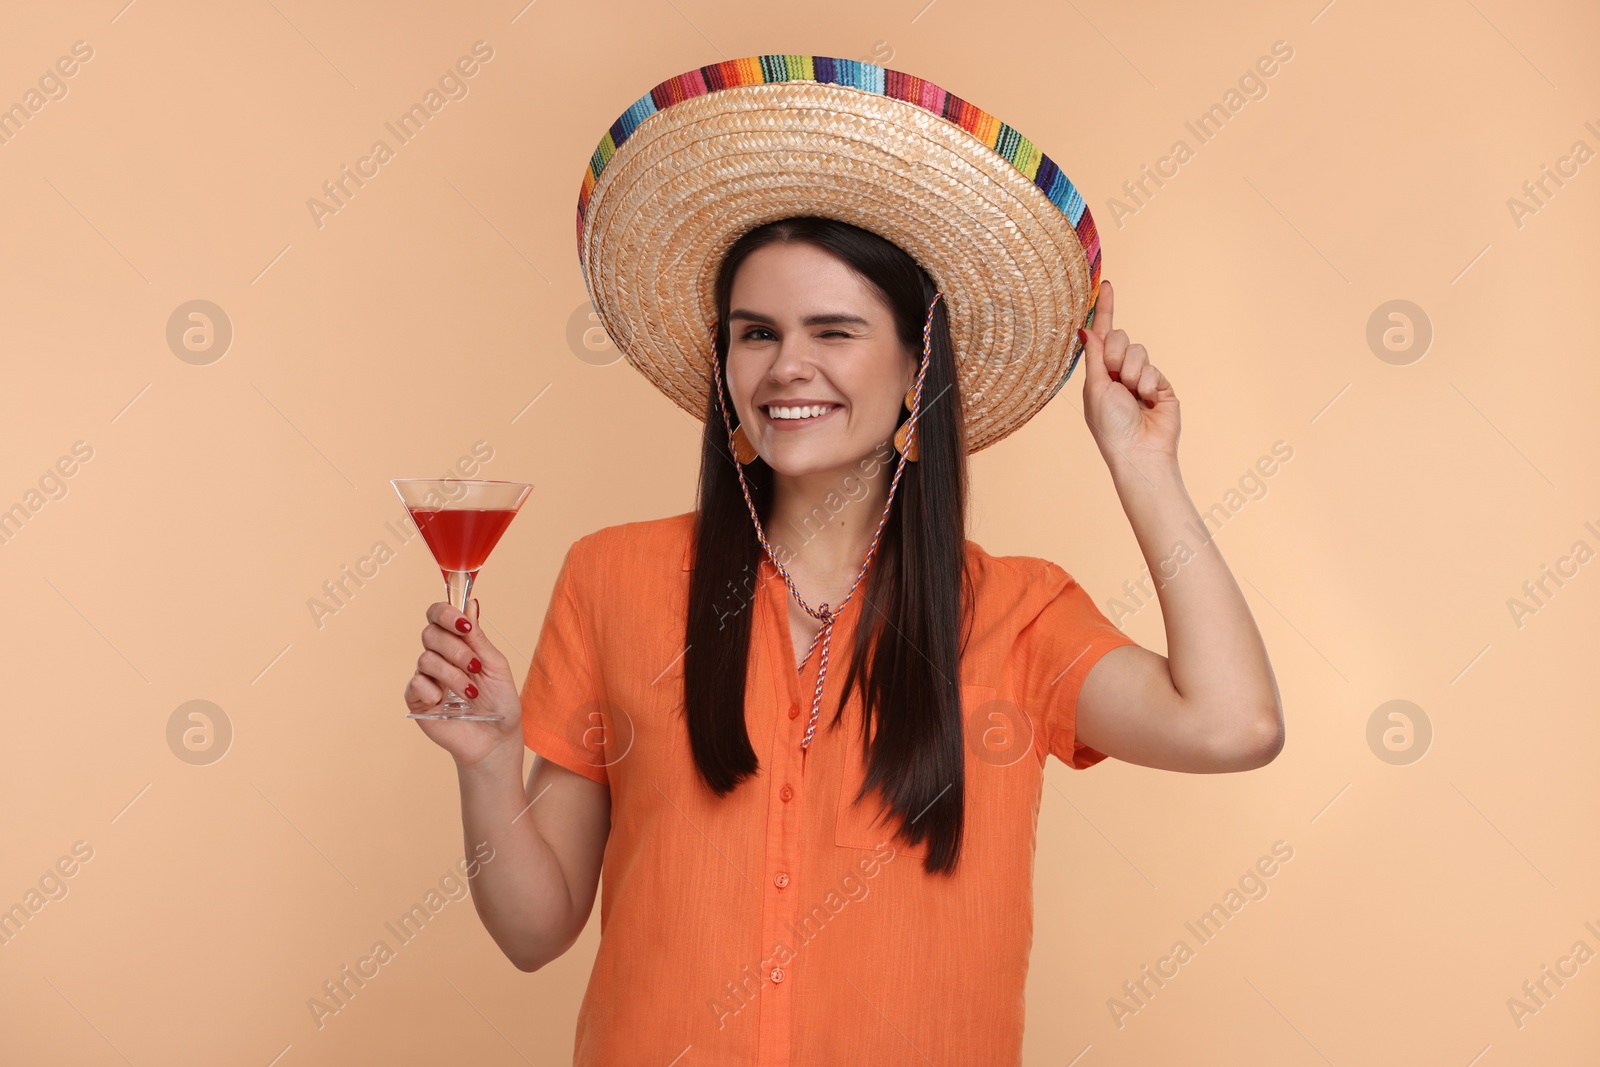 Photo of Young woman in Mexican sombrero hat with cocktail winking on beige background